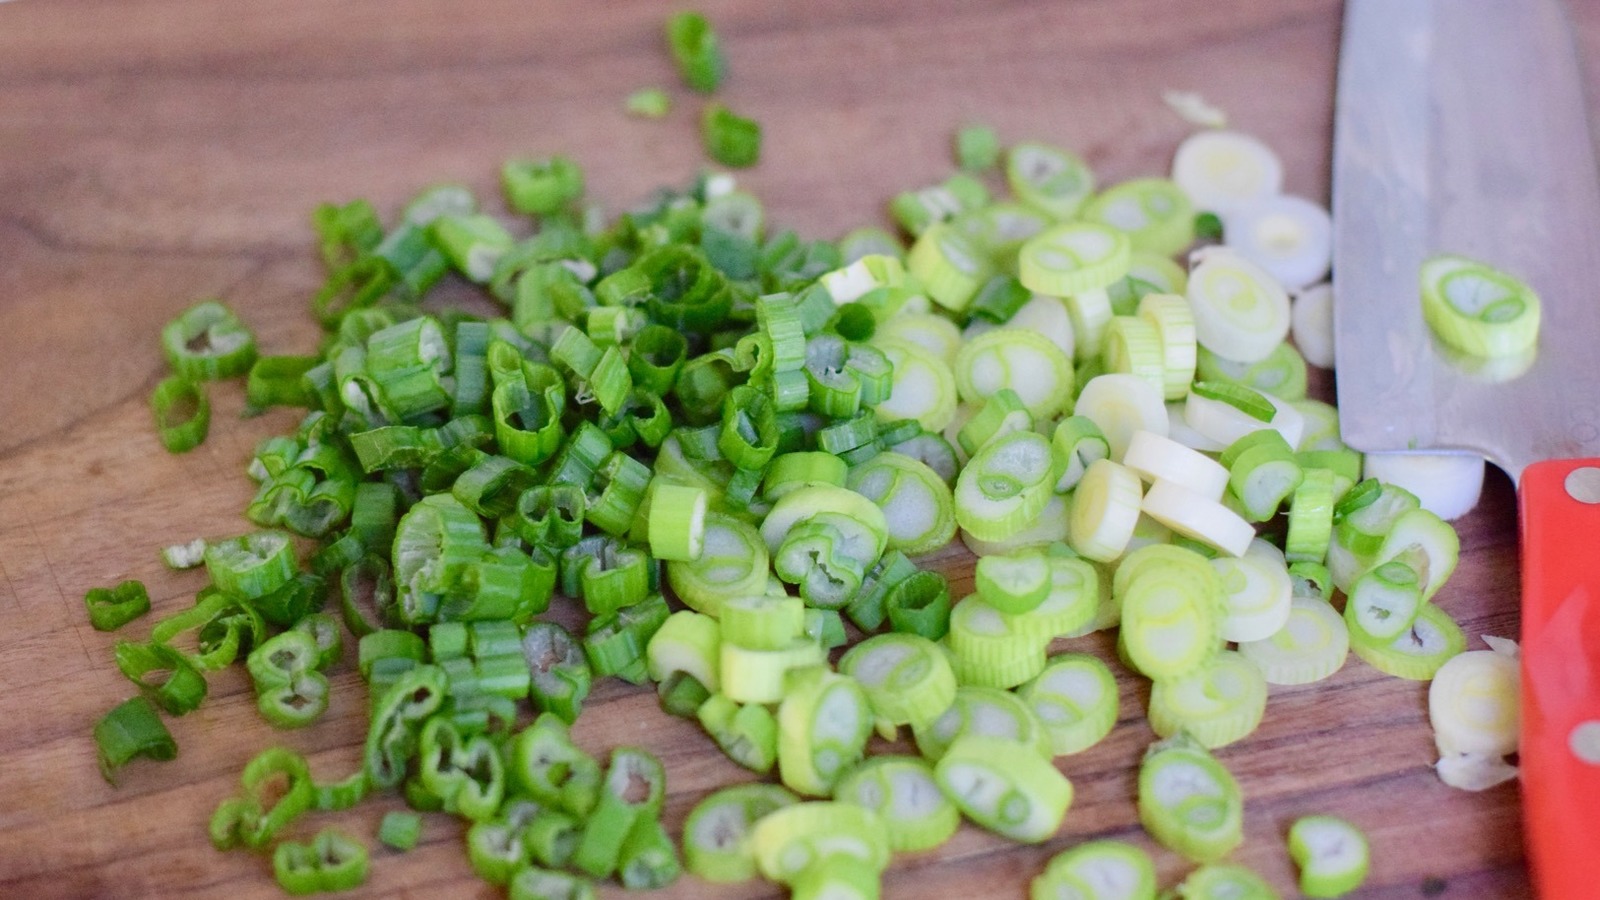 How to Cut Green Onions (Scallions), Recipe